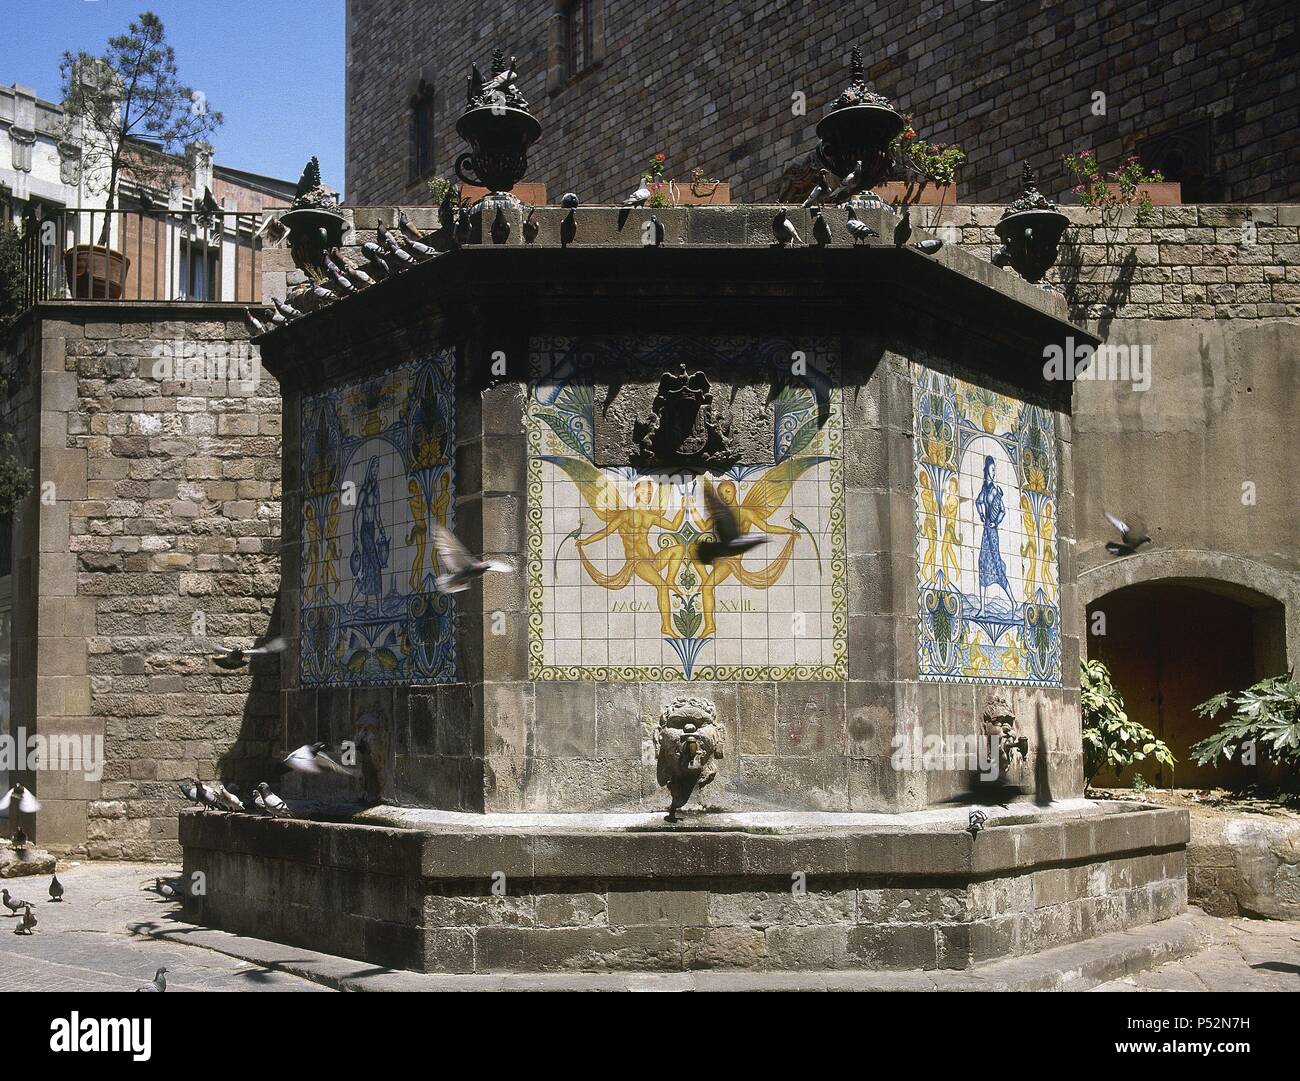 Fountain of the Puerta del Angel. Originally Gothic, was rebuilt in neoclassical style. In 1918 he added the ceramic murals by Josep Aragay. Barcelona. Catalonia. Spain. Stock Photo